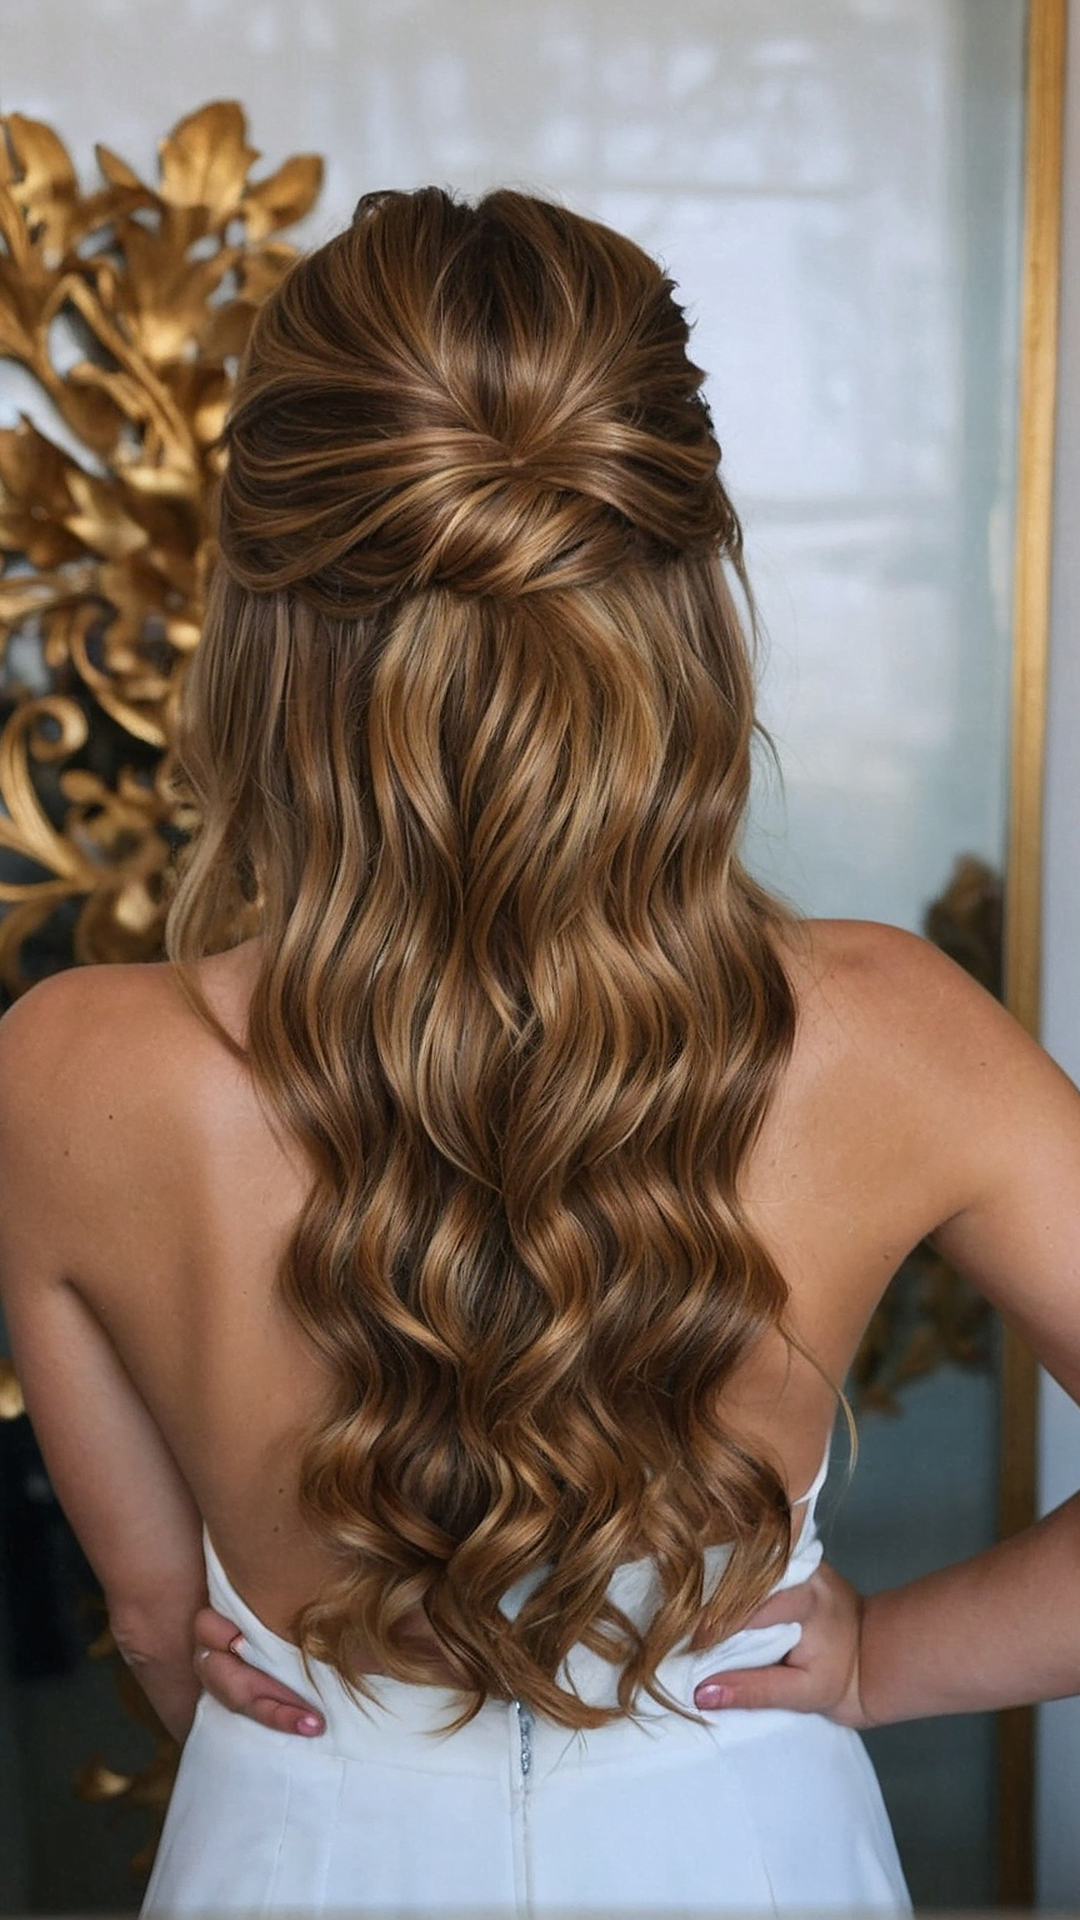 Fairytale Fishtail: Dreamy Prom Hairstyle